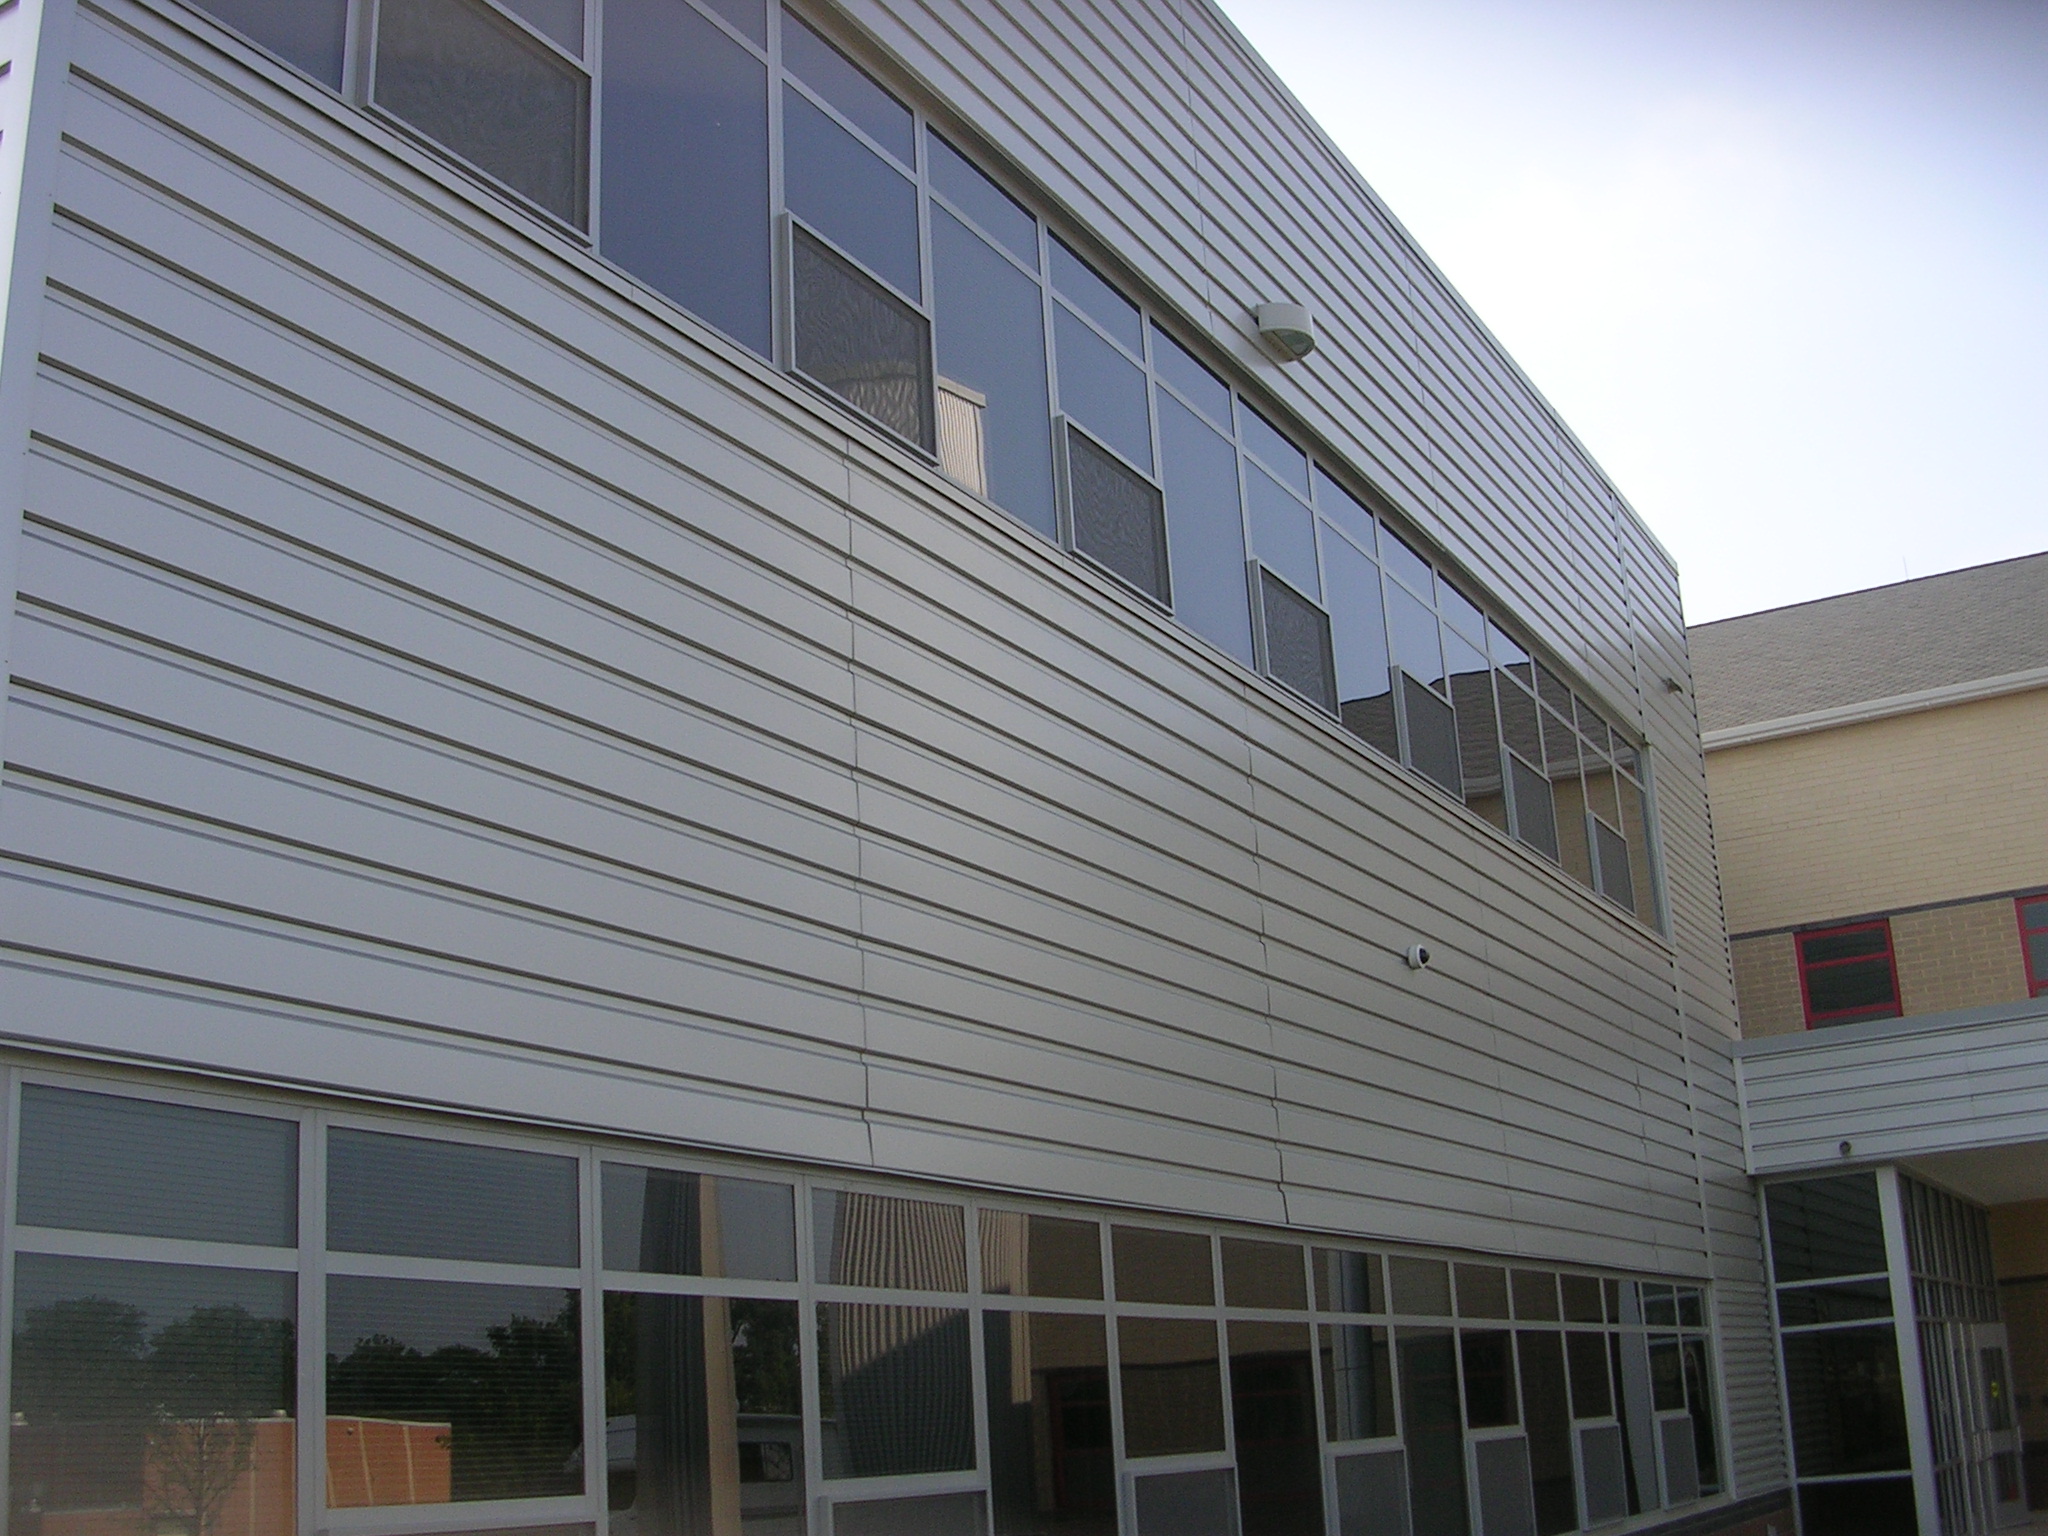  Metal siding comes in a variety of metals, styles, and colors. It is most often associated with modern, industrial, utilitarian, and retro buildings.&nbsp; 